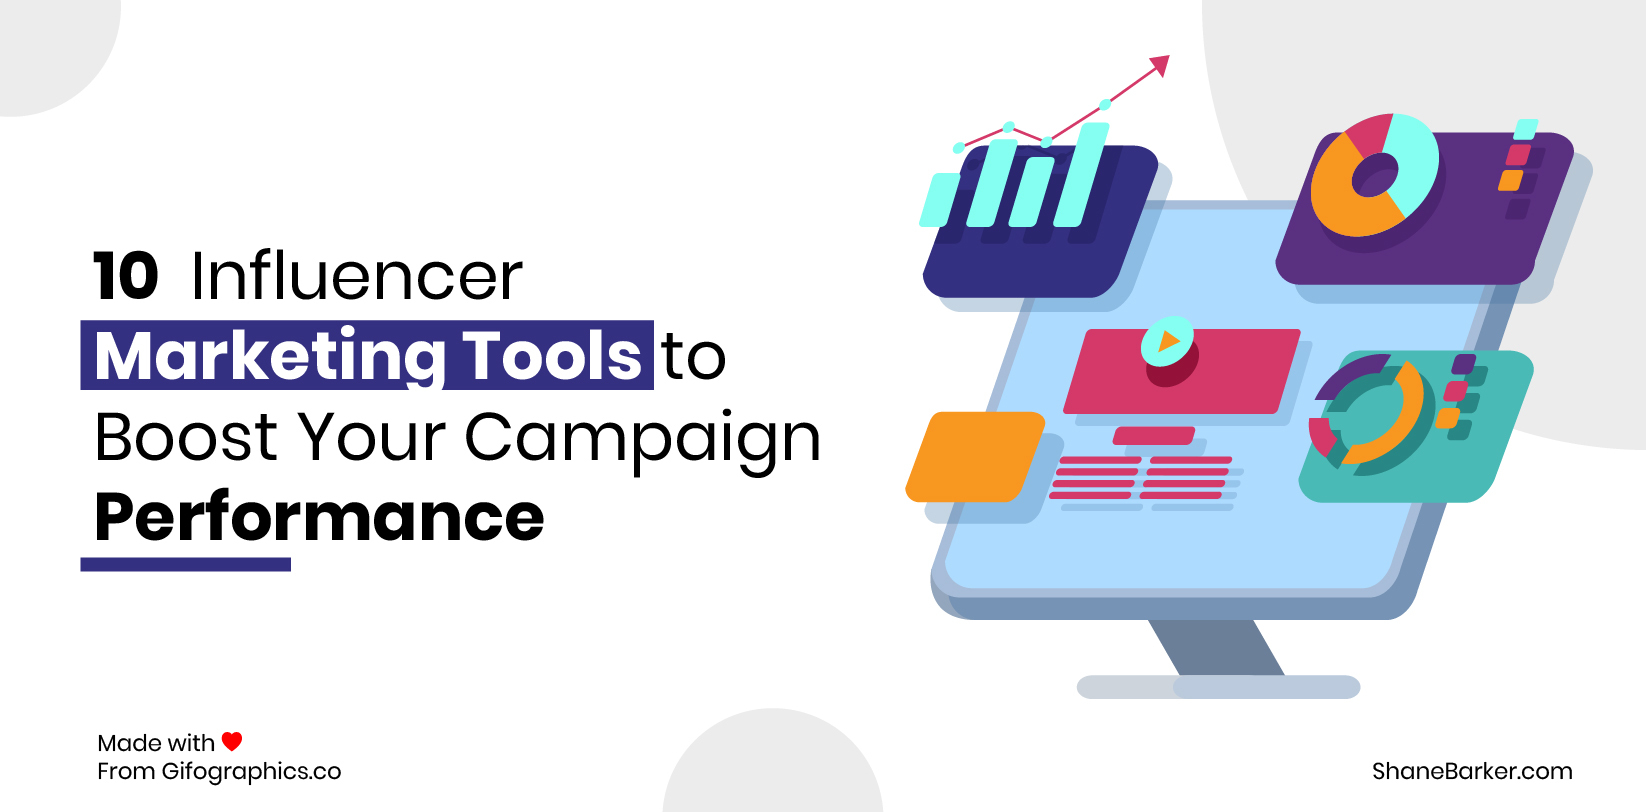 10 Influencer Marketing Tools to Boost Your Campaign Performance